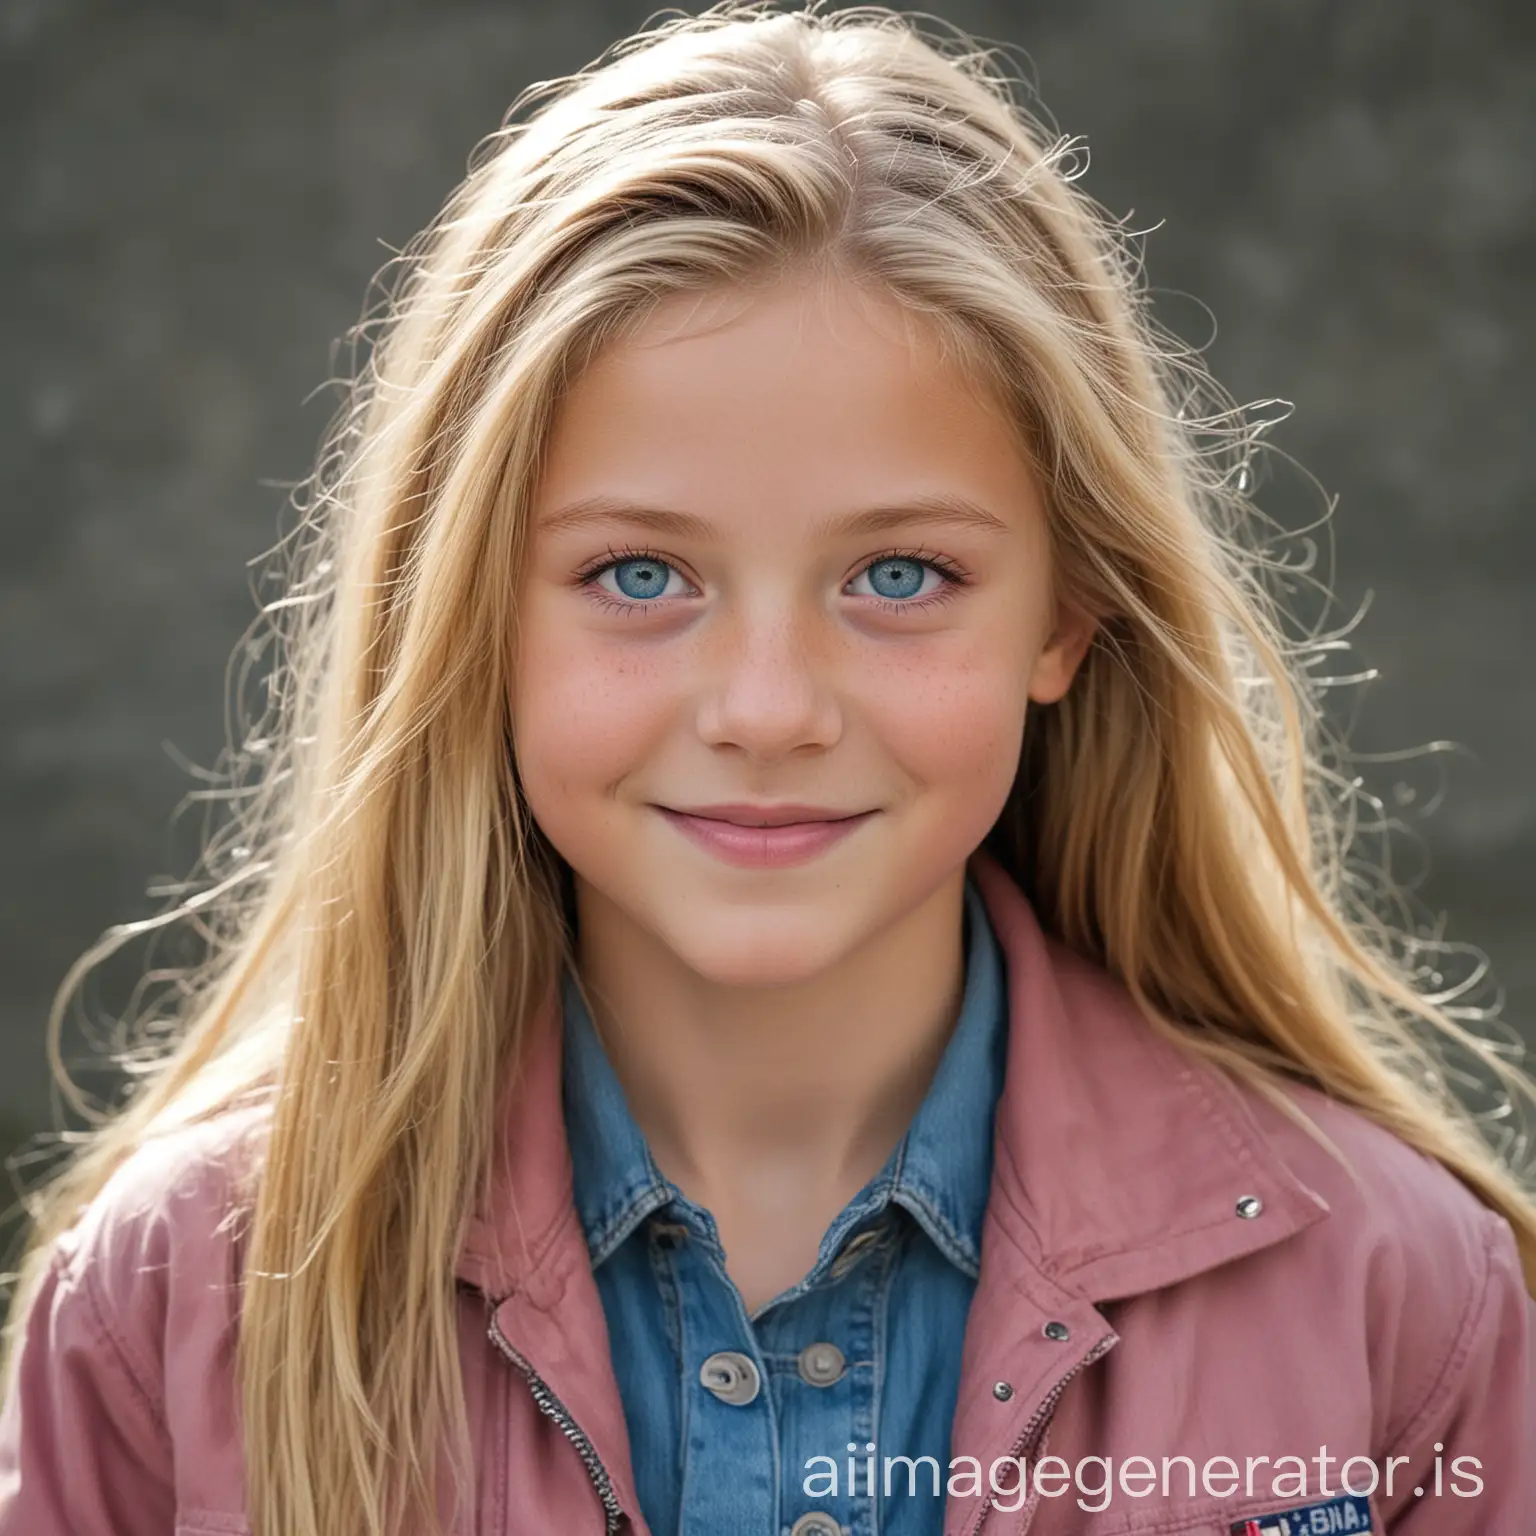 A girl with long dirty blonde hair, blue eyes, wearing a dusty rose jacket,  12 years old, American, slightly smiling